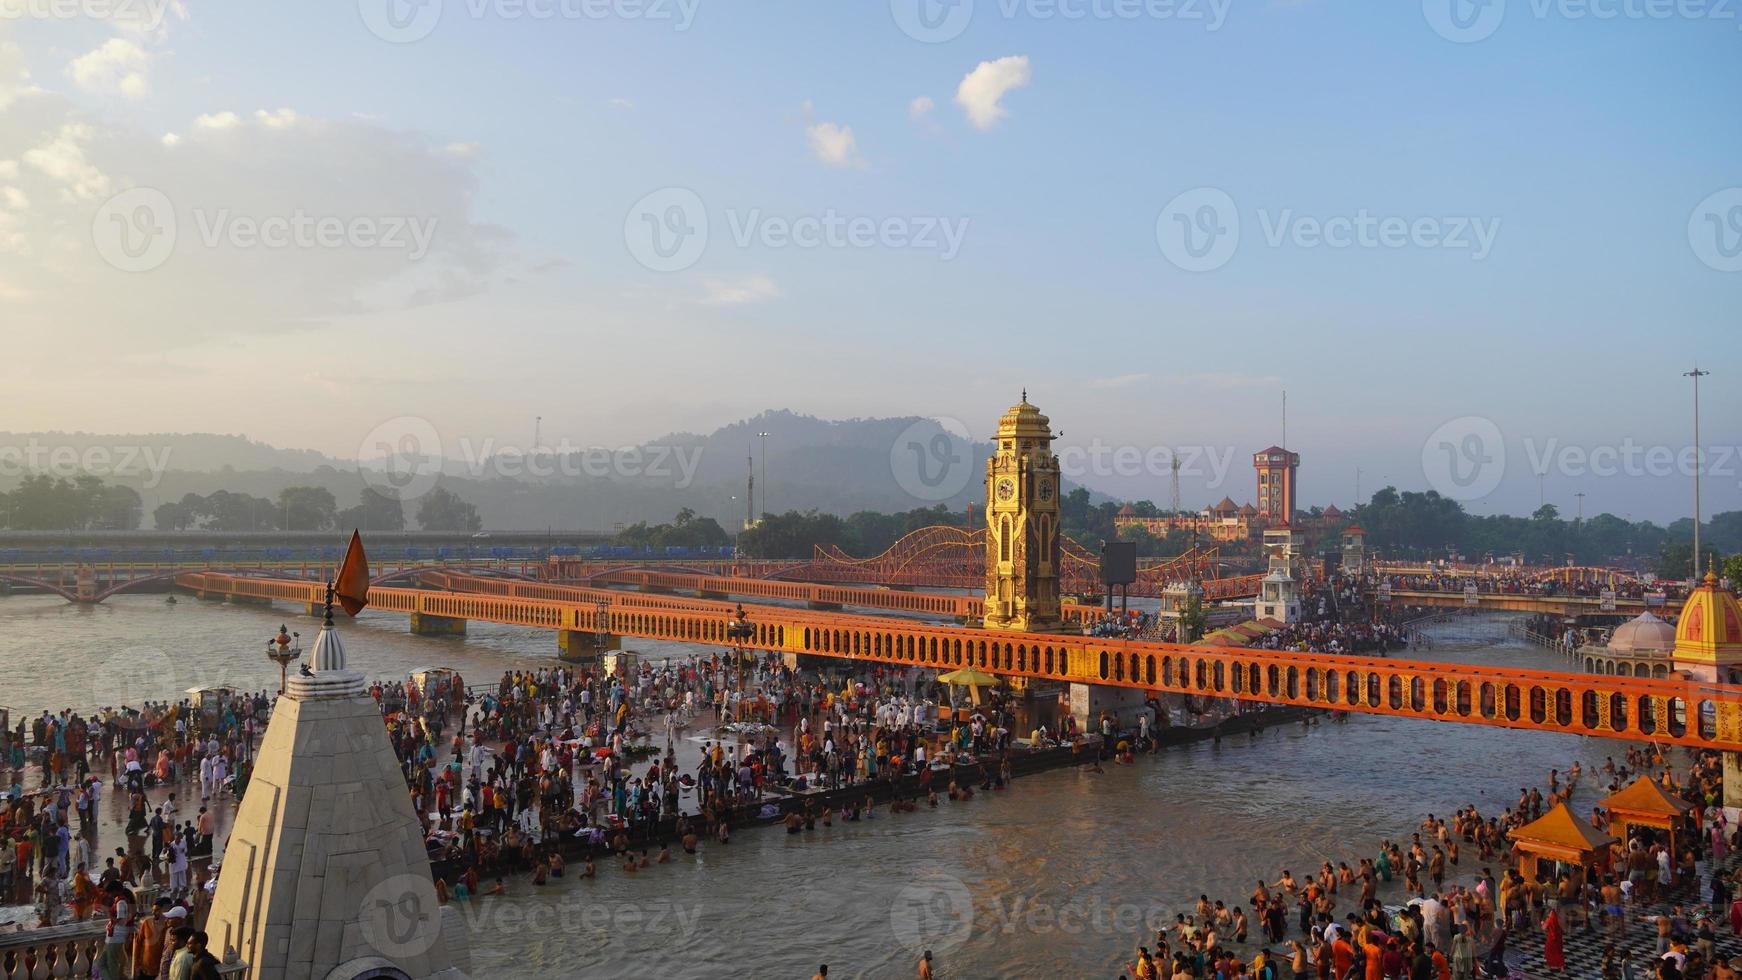 beautiful image of holy river with many people. photo